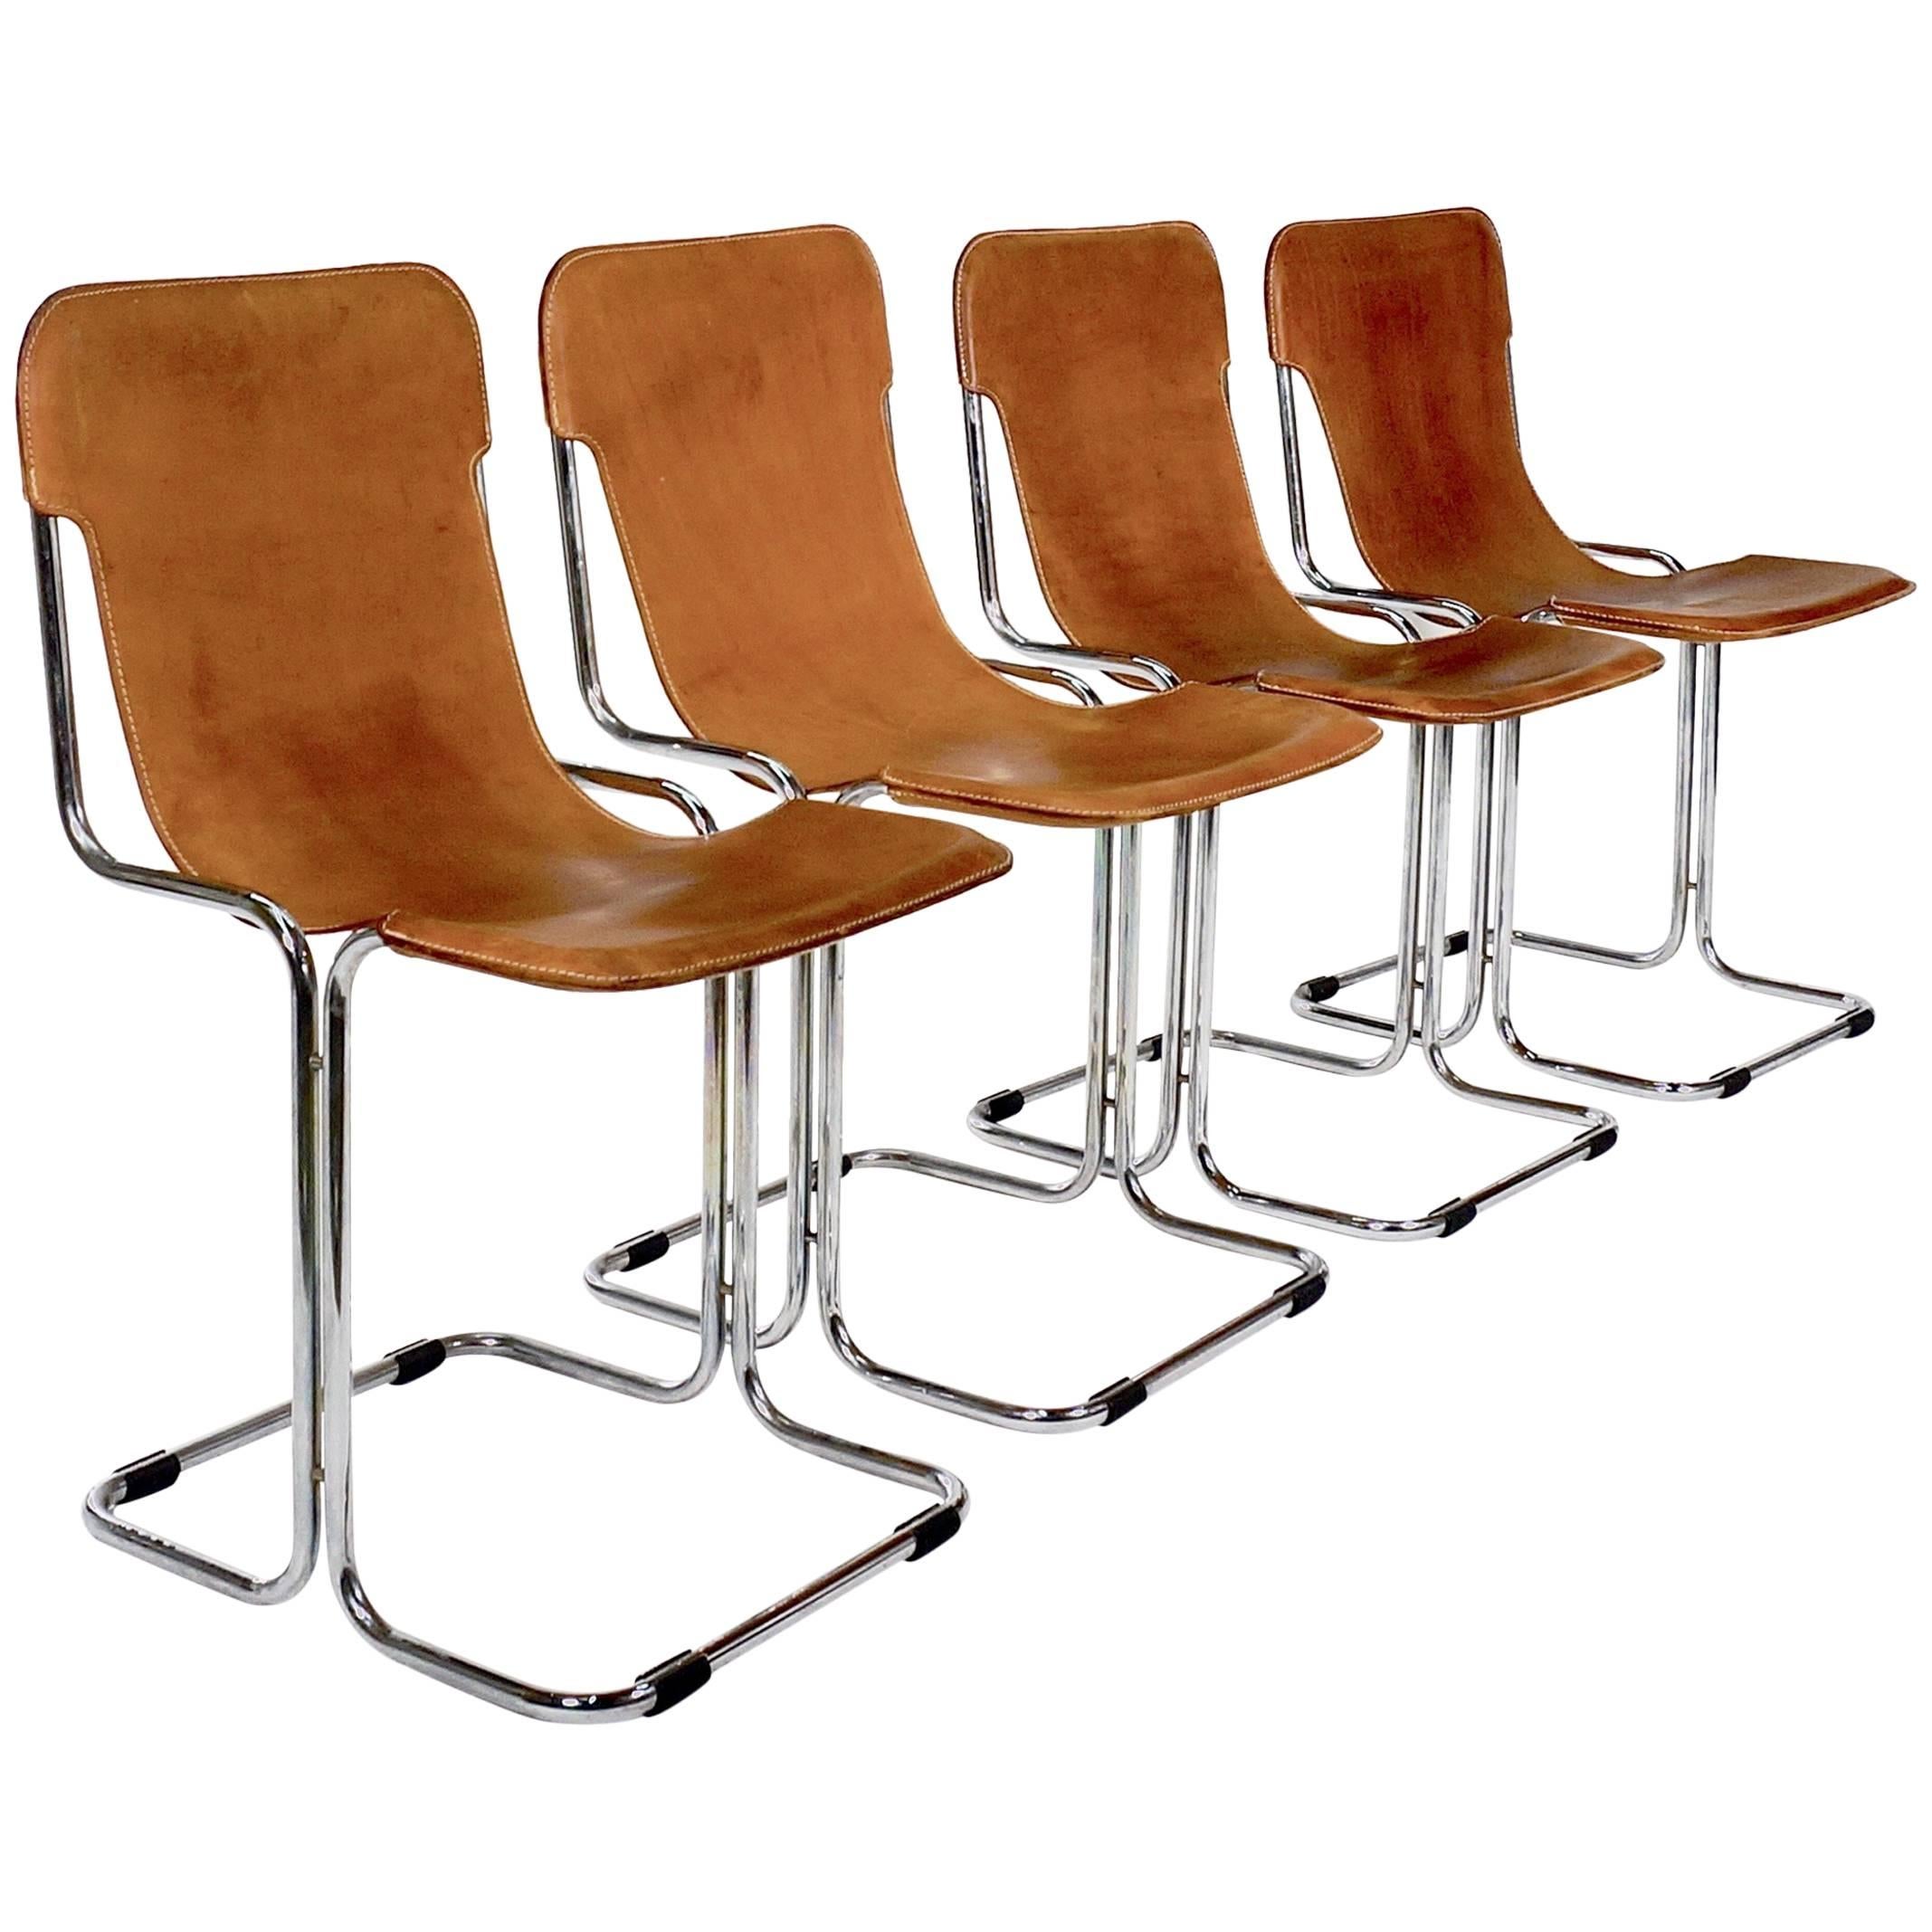 Set of Four Chromed Tubular Metal Chairs with Slung Leather Seats For Sale